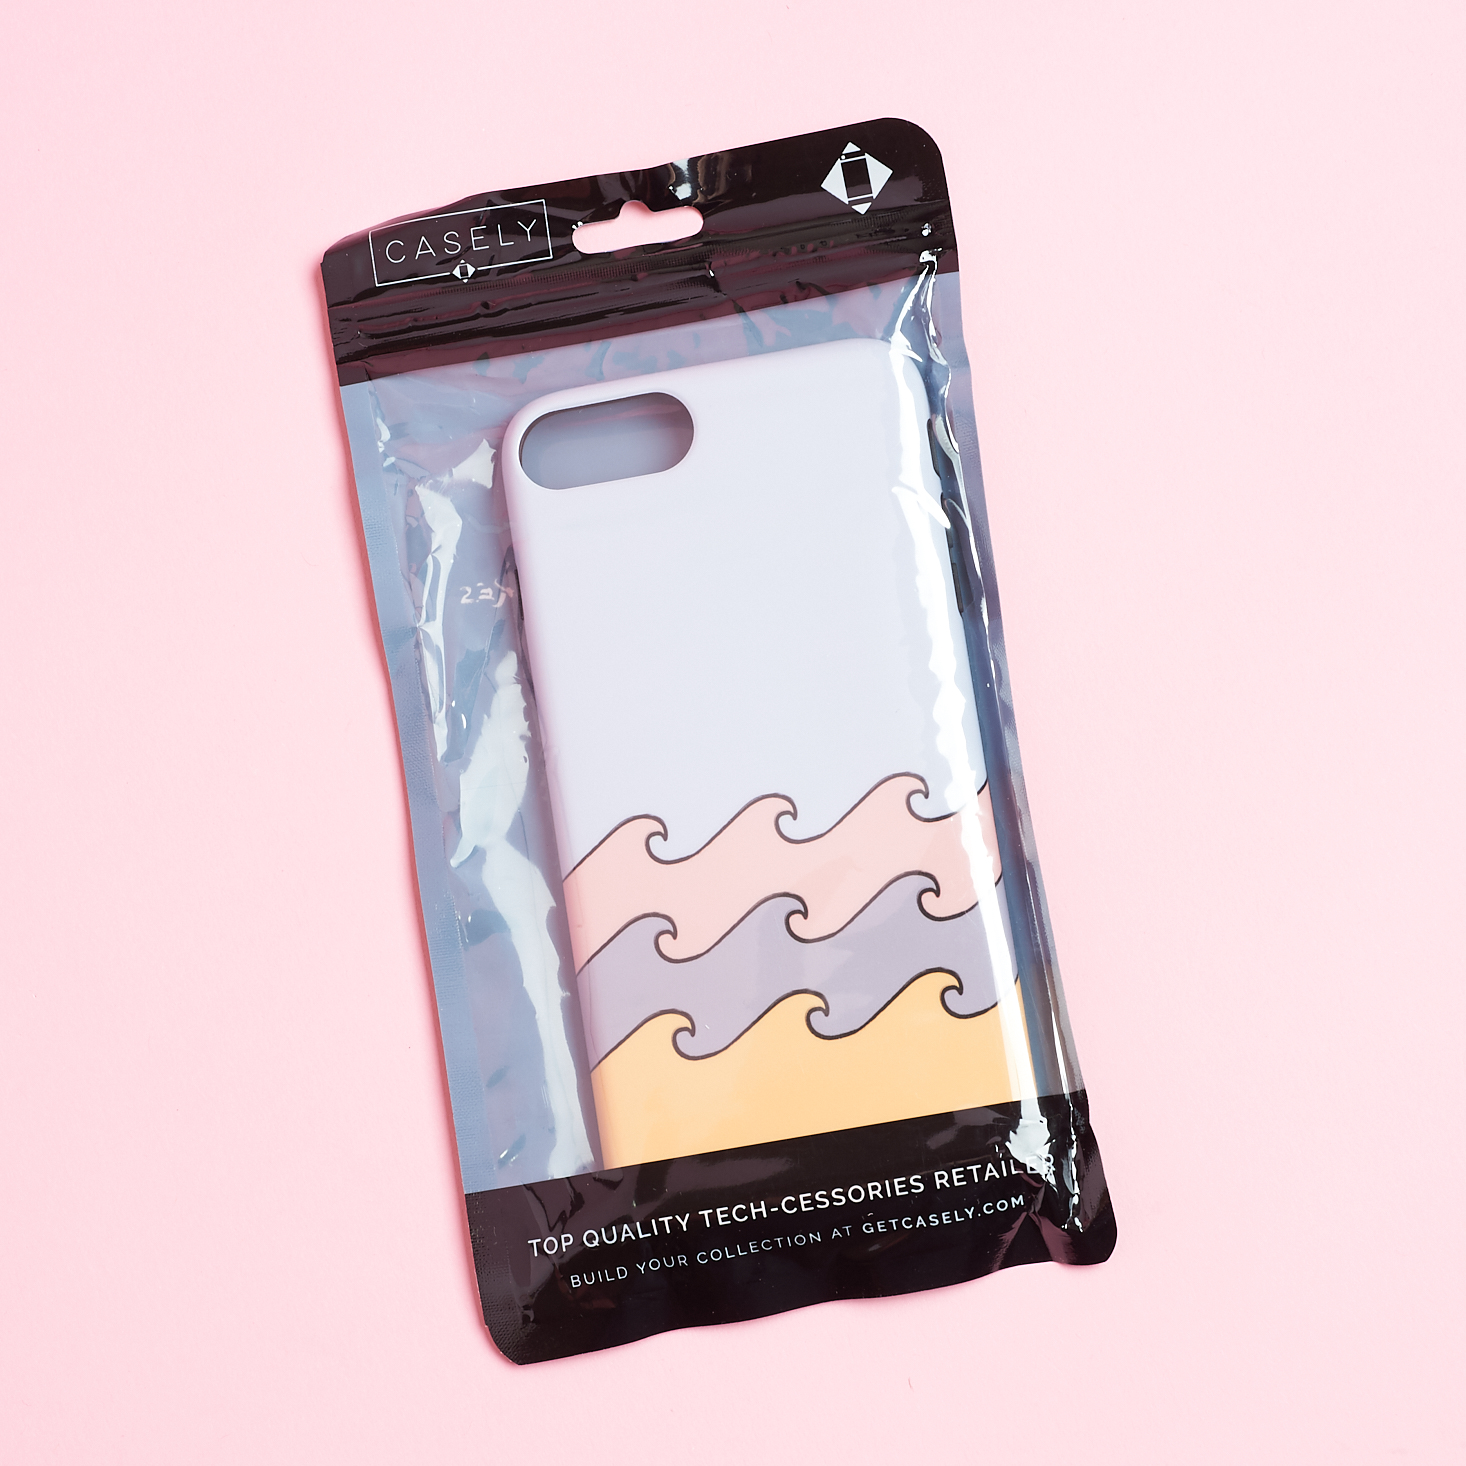 caely wave case in bag